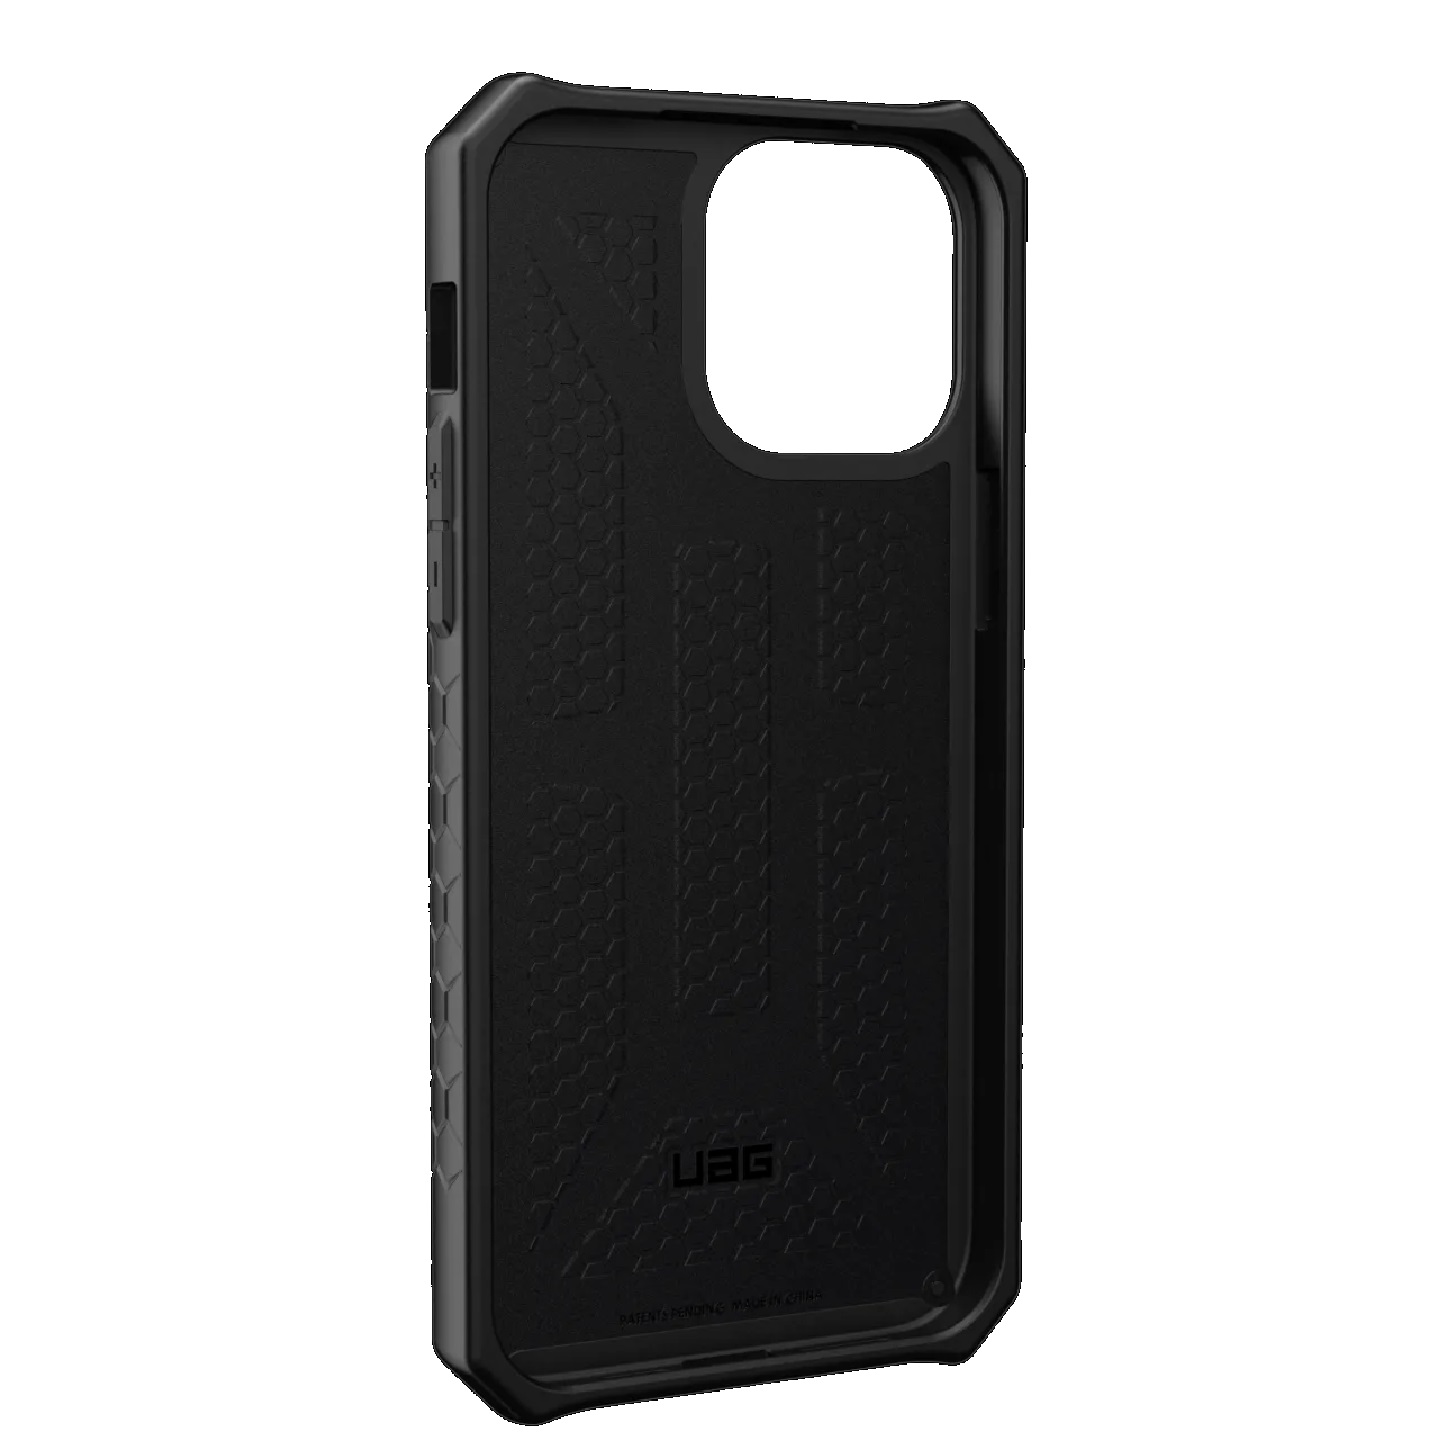 UAG Monarch Apple iPhone 13 Pro Max Case – Black (113161114040), 20ft. Drop Protection (6M), 5 Layers of Protection, Tactical Grip, Rugged